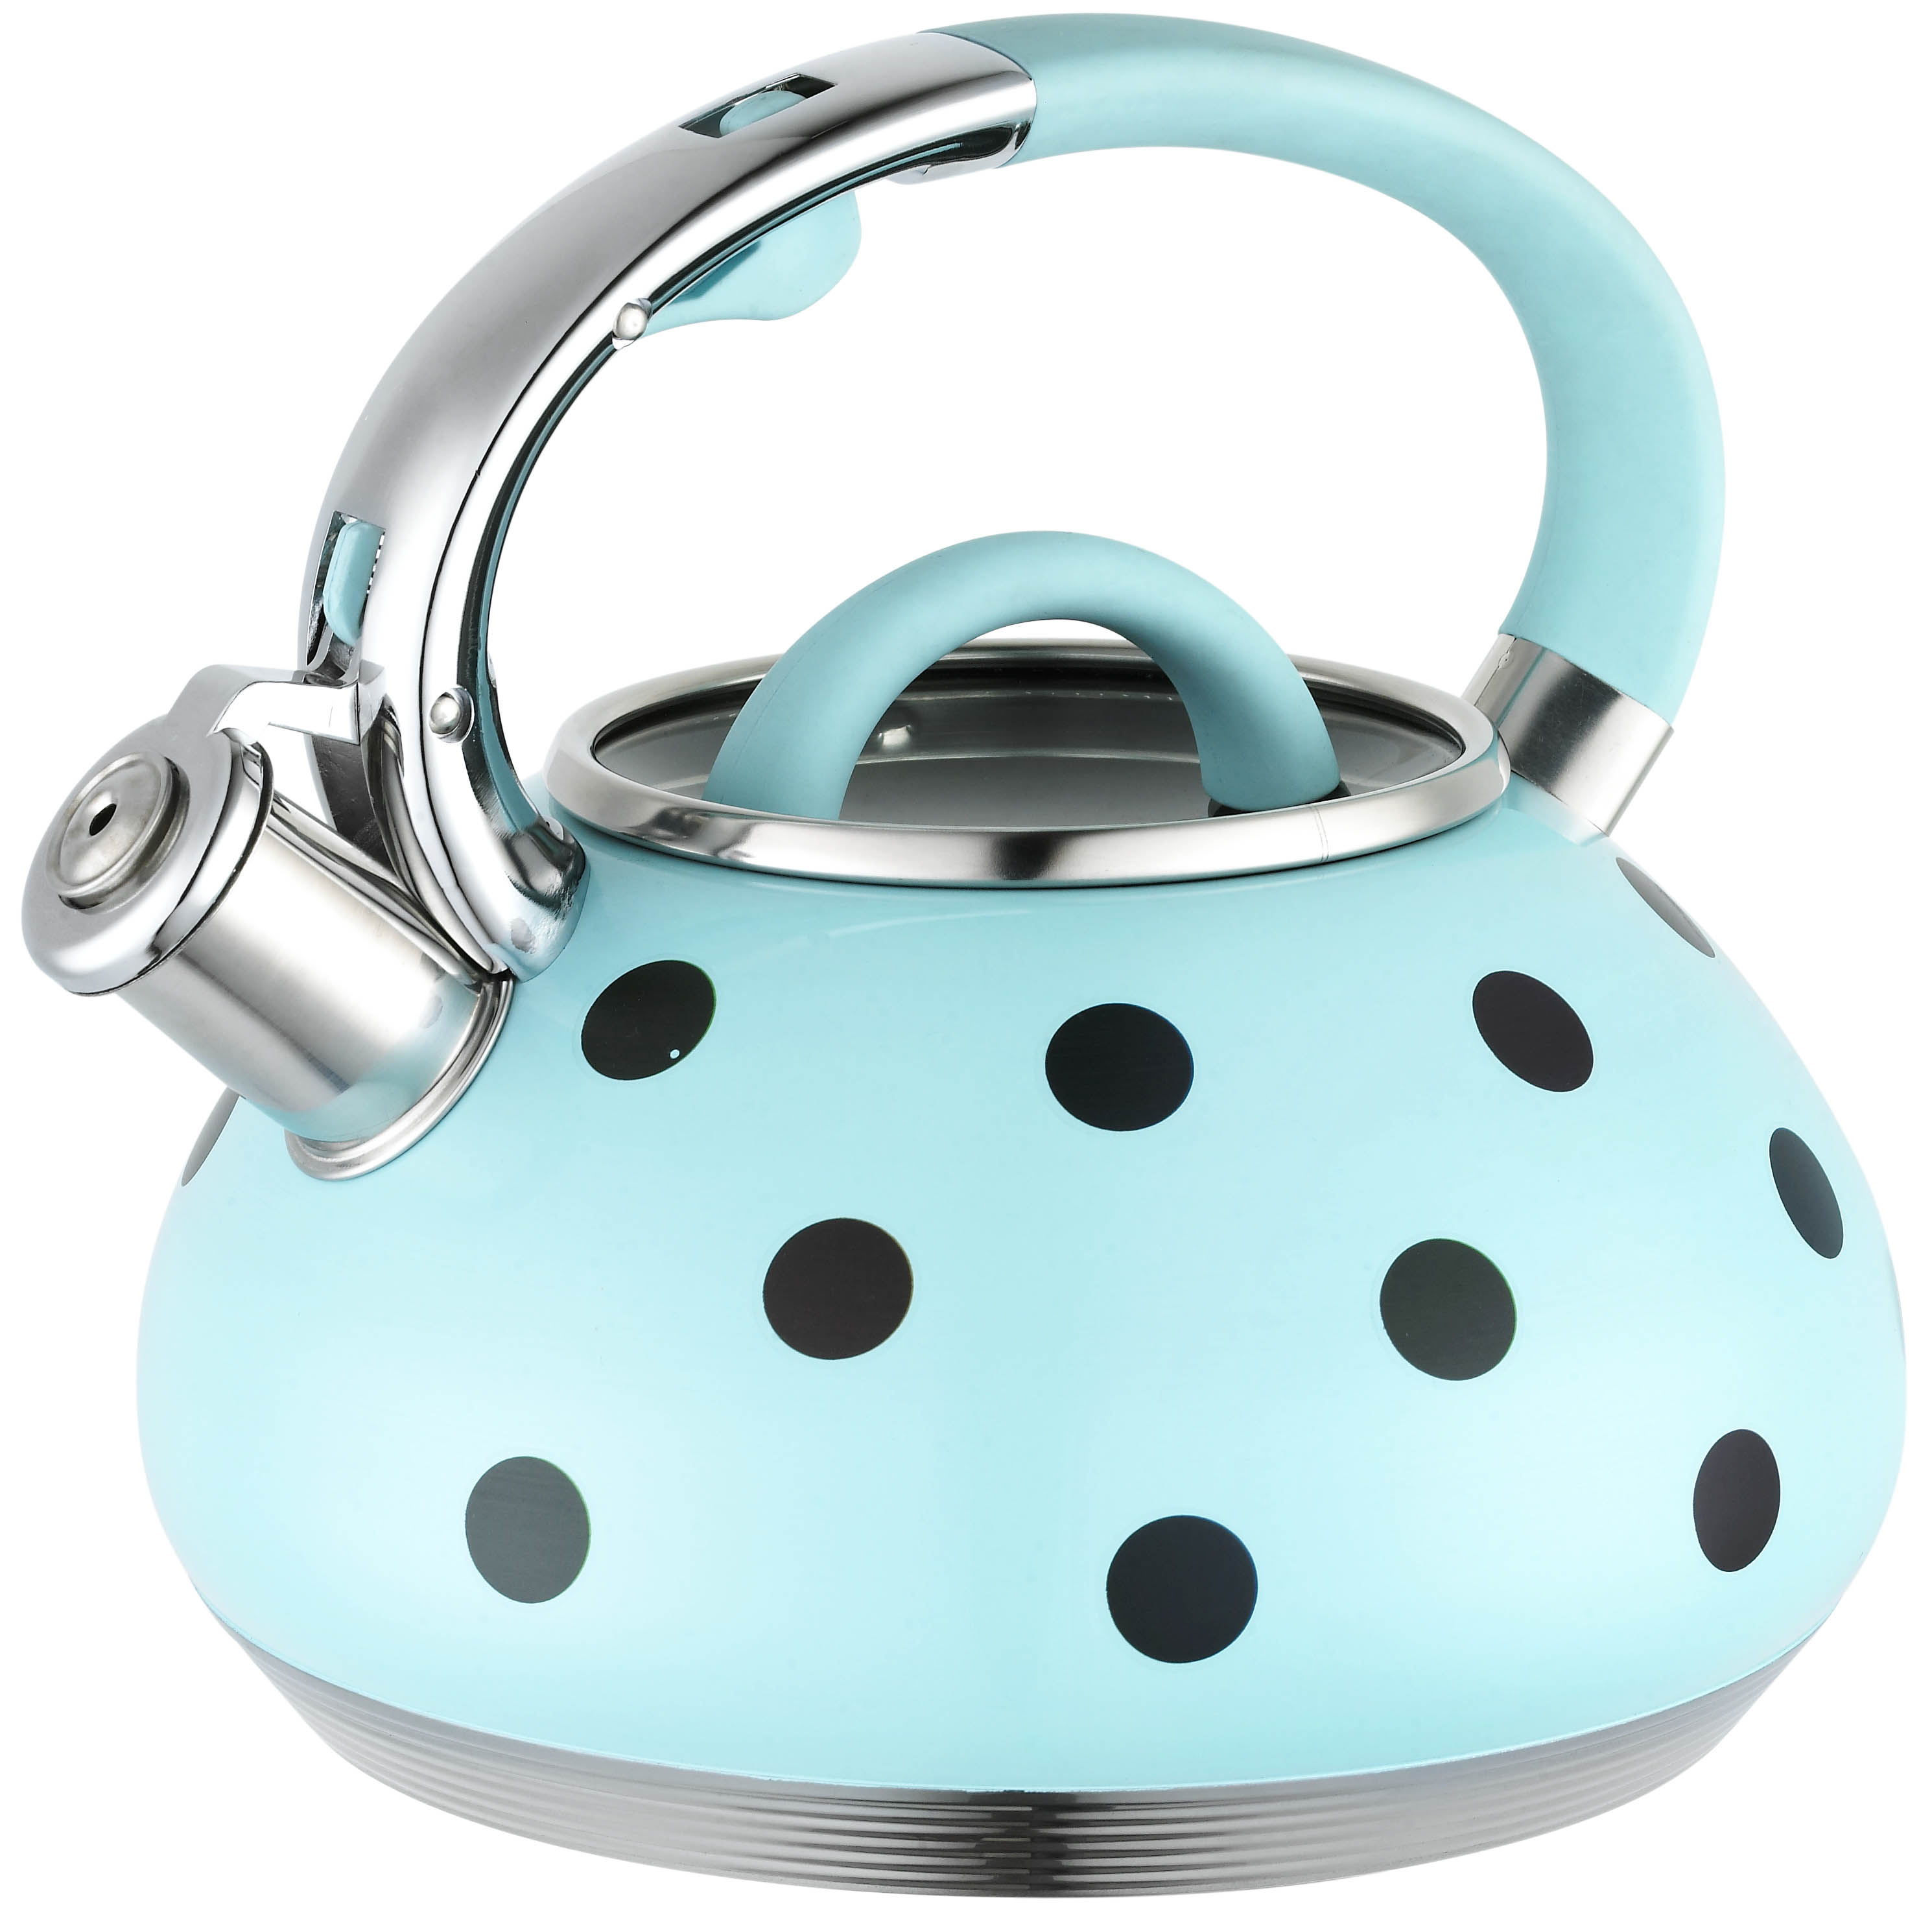 The Whistle Kettle